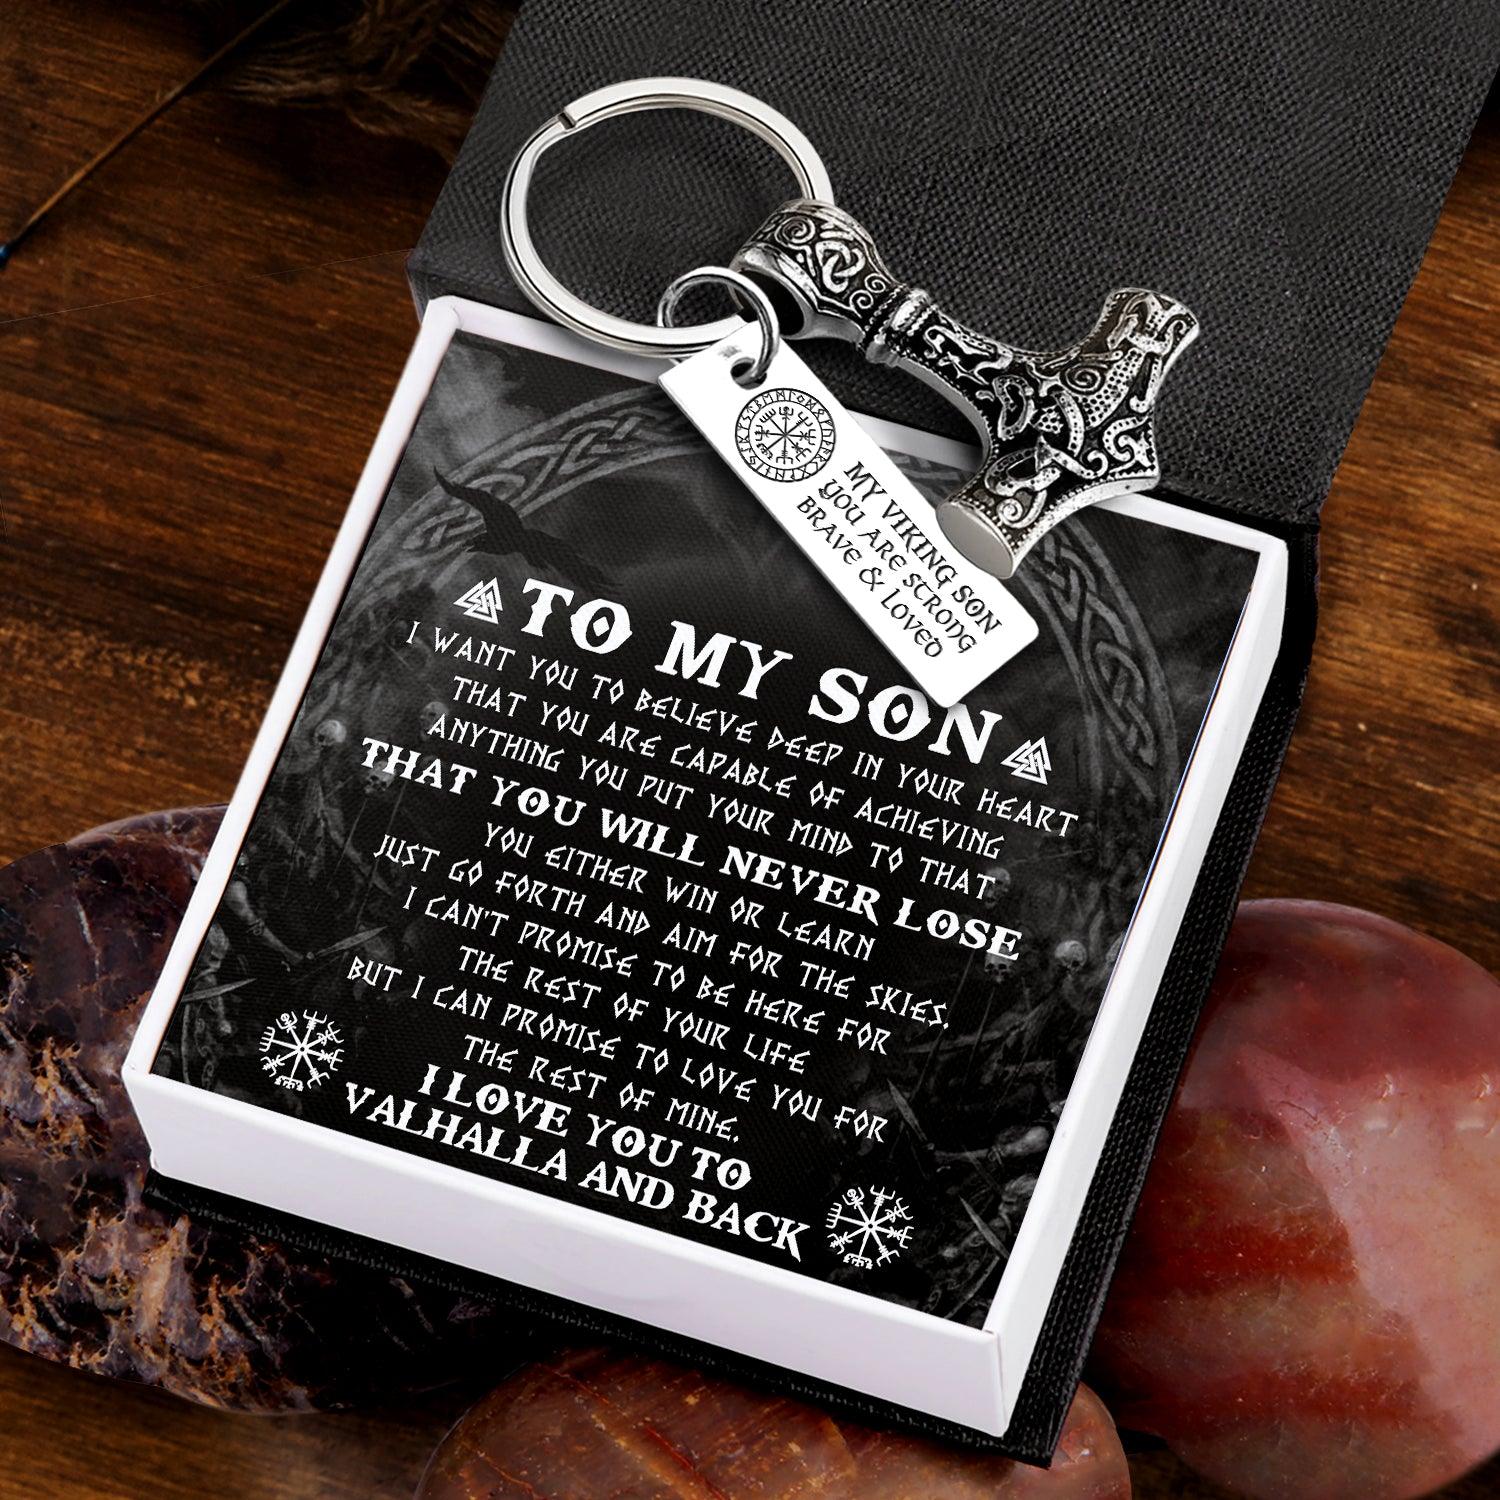 Viking Thor Keychain - Viking - To My Son - You Will Never Lose - Augkbv16004 - Gifts Holder